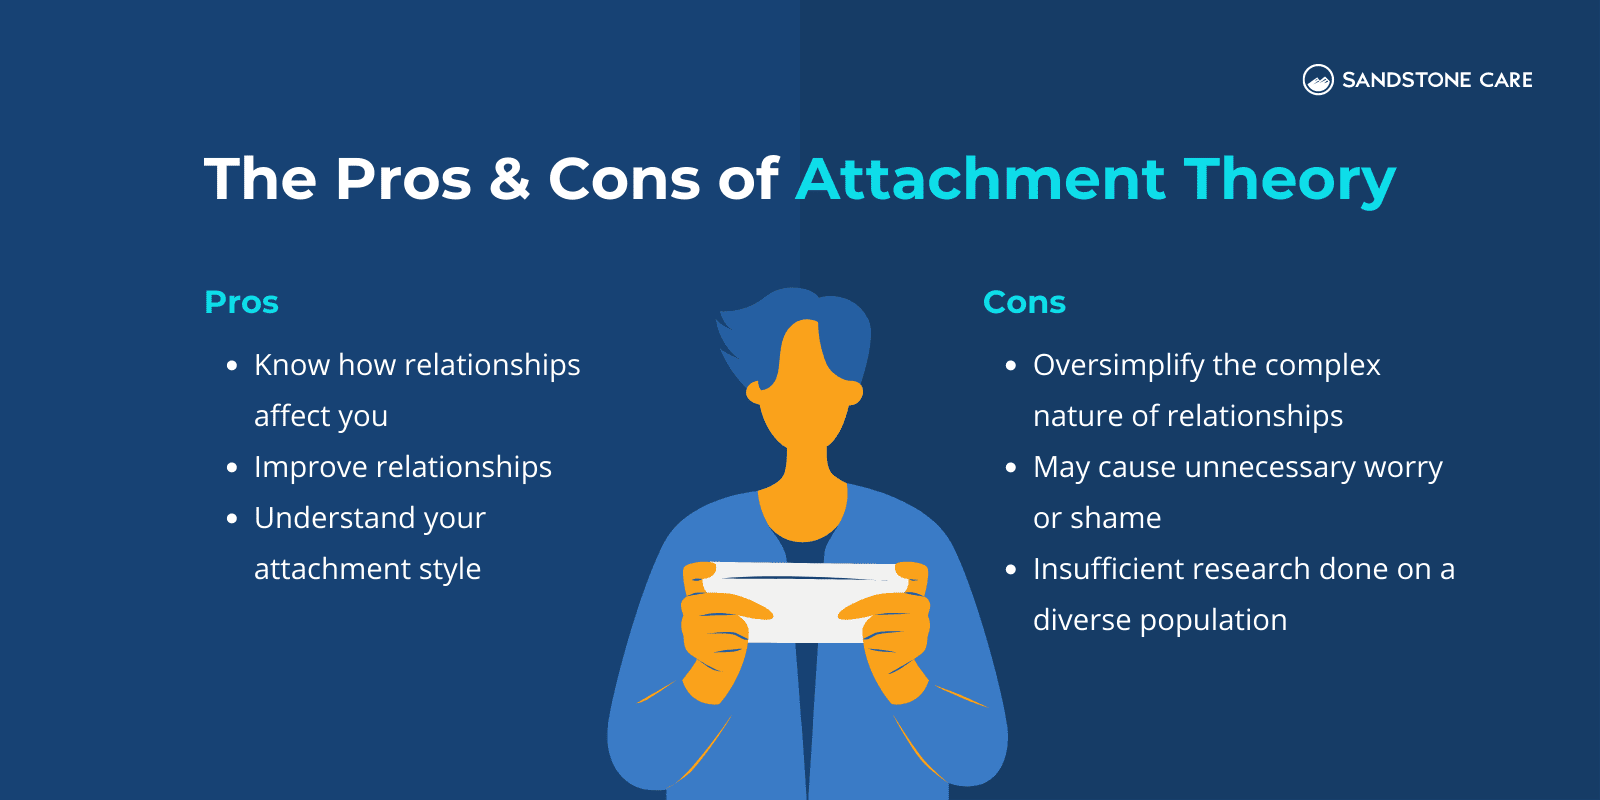 What is your Attachment Style?